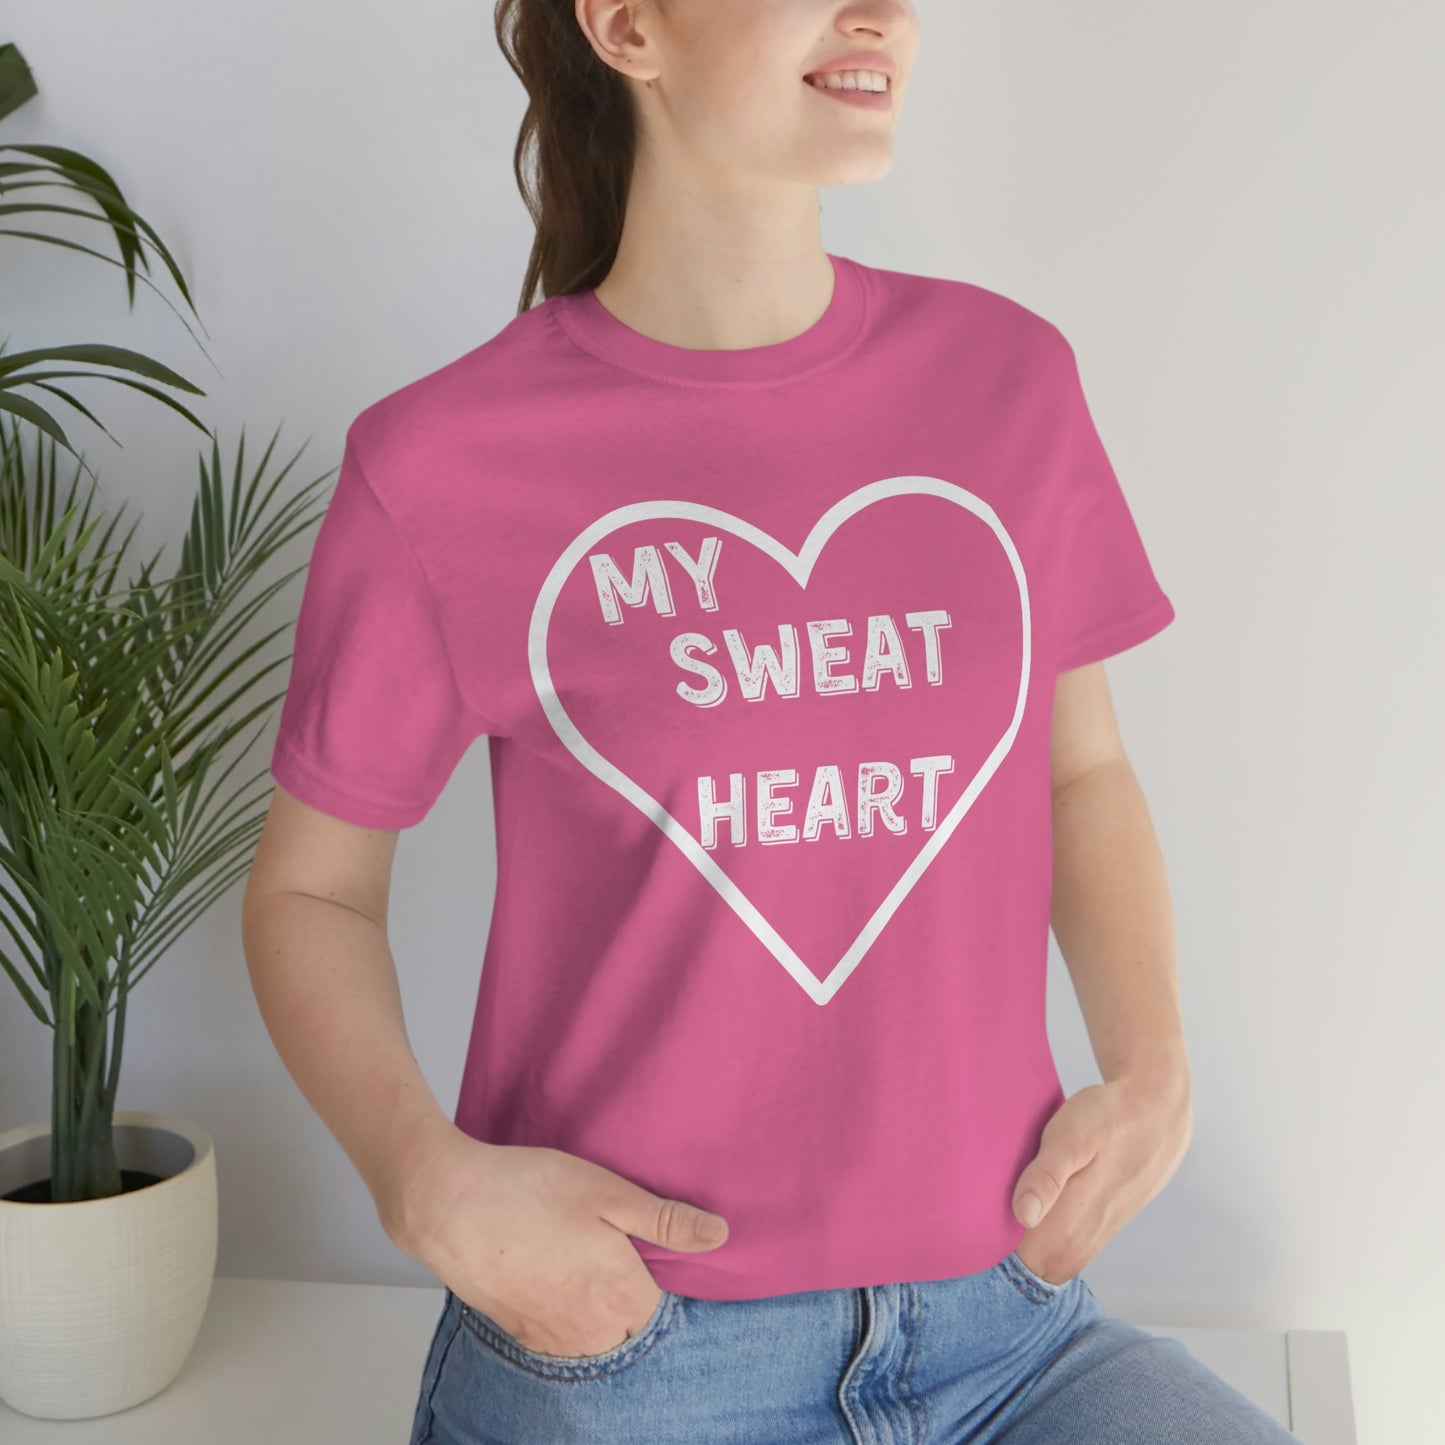 My Sweat Heart - Love shirt - Gift for wife - Gift for Husband - Gift for Girlfriend and Boyfriend